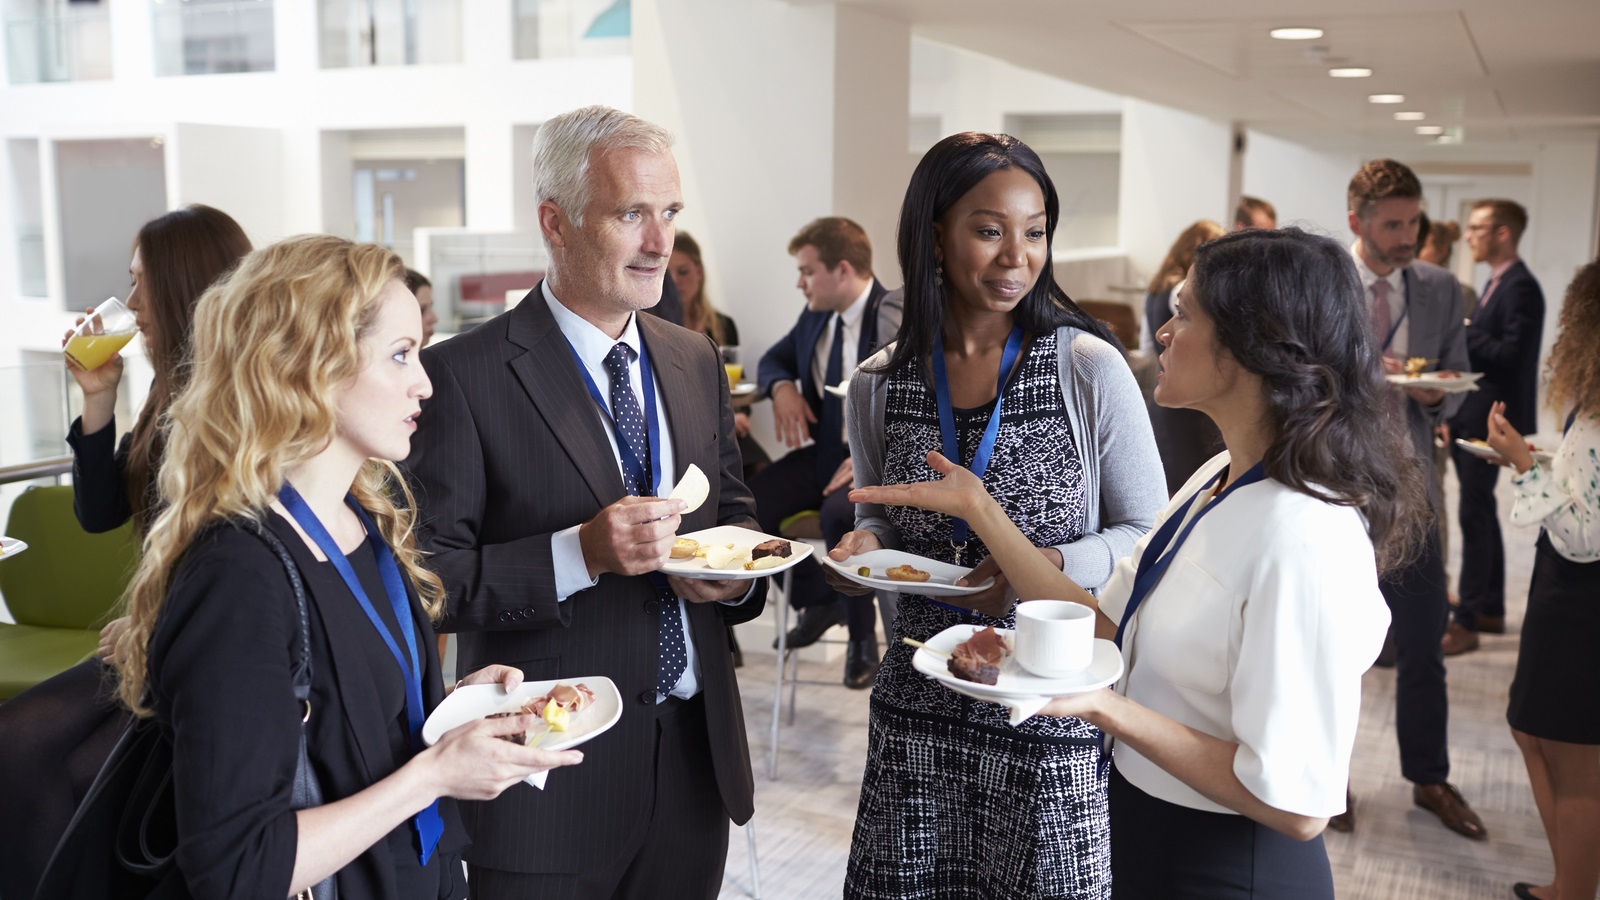 What Today’s Millennials in the Workplace Can Learn From Boomers About Networking